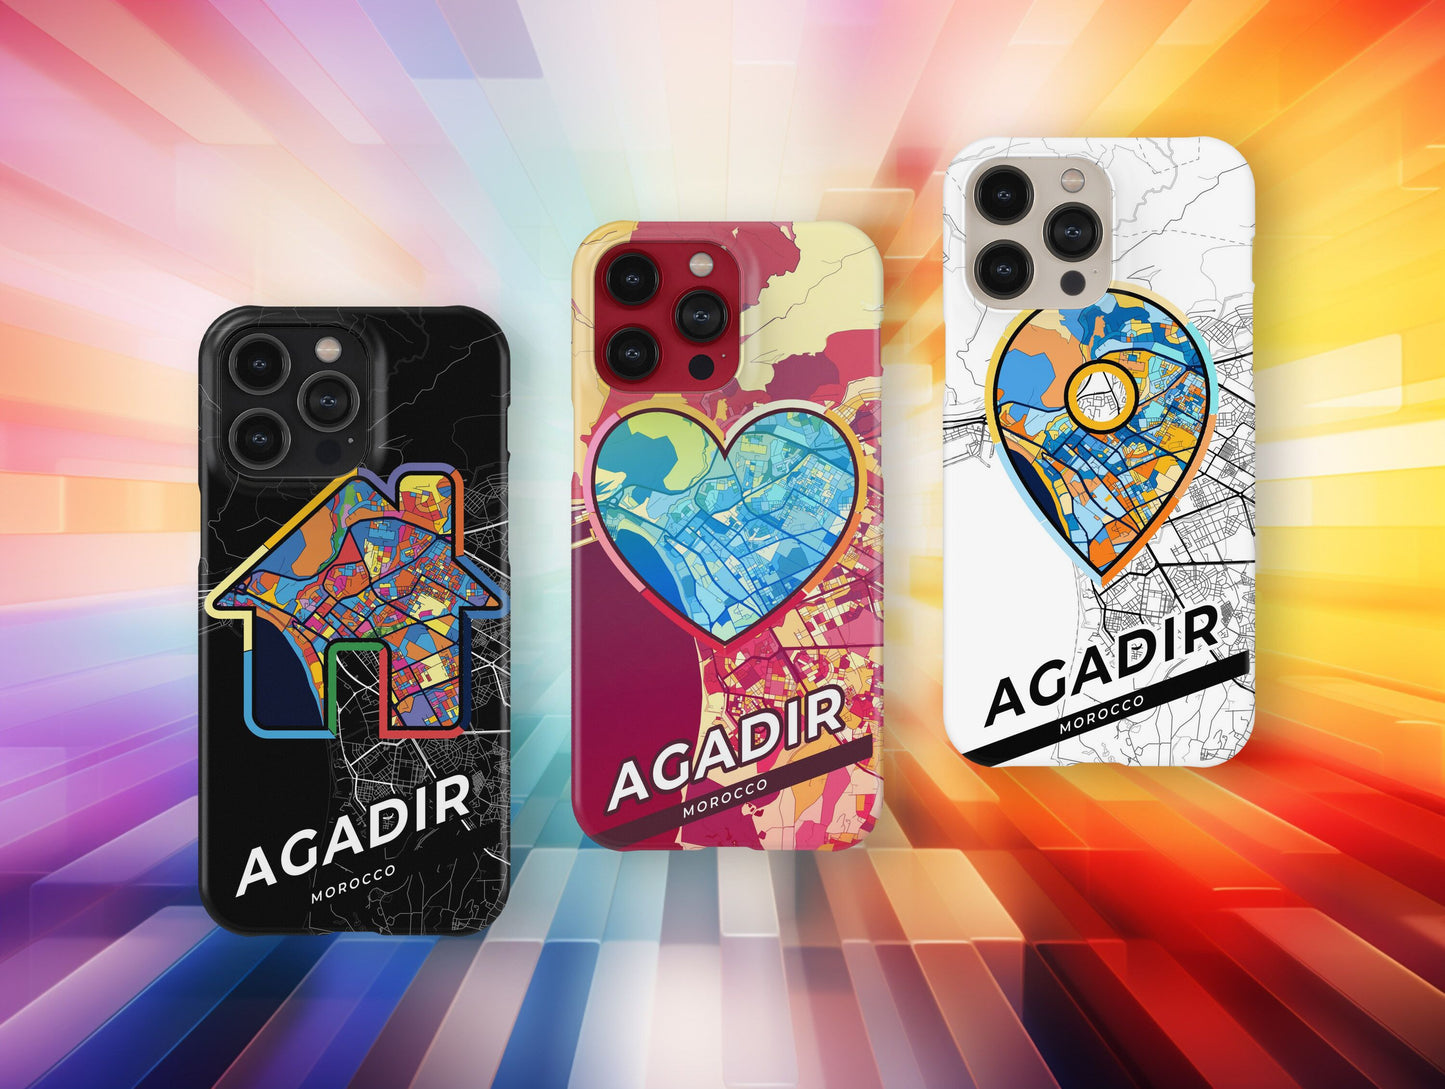 Agadir Morocco slim phone case with colorful icon. Birthday, wedding or housewarming gift. Couple match cases.